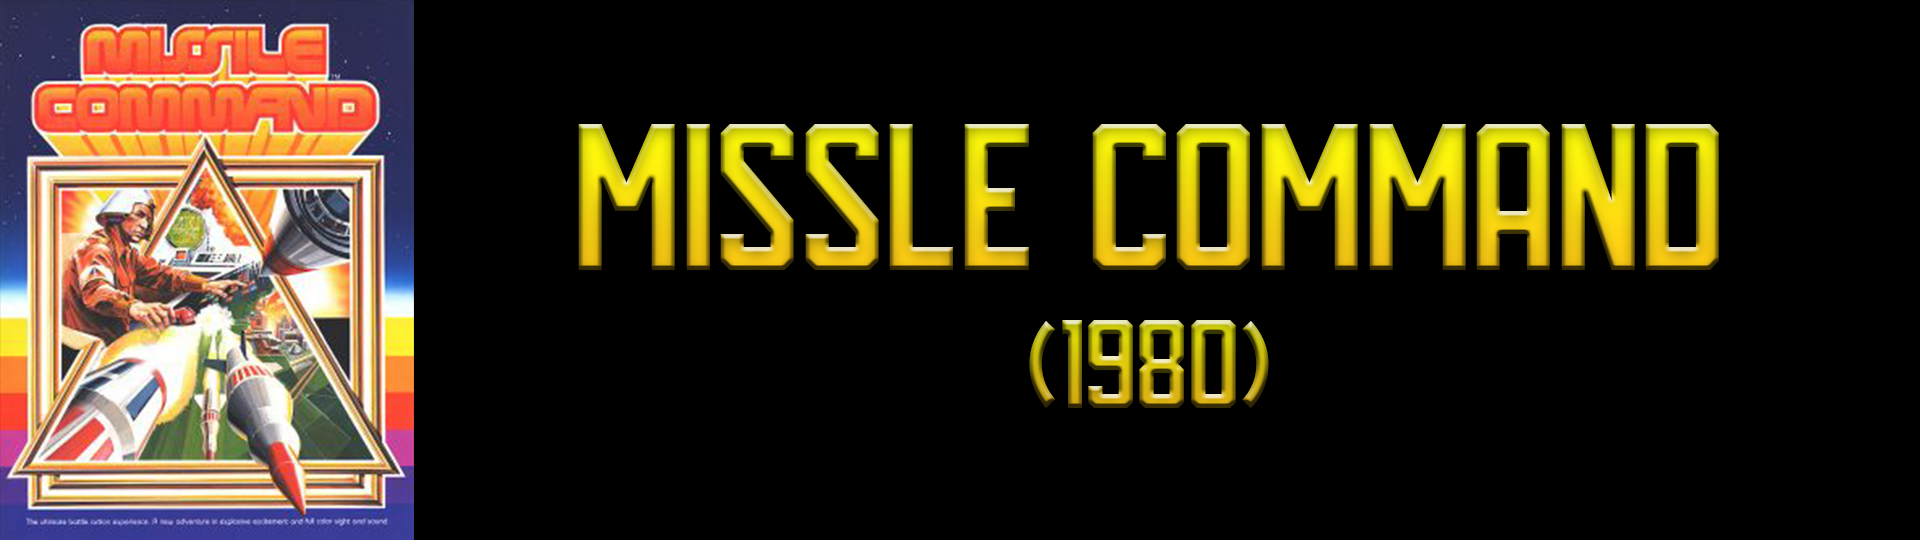 Missle Command